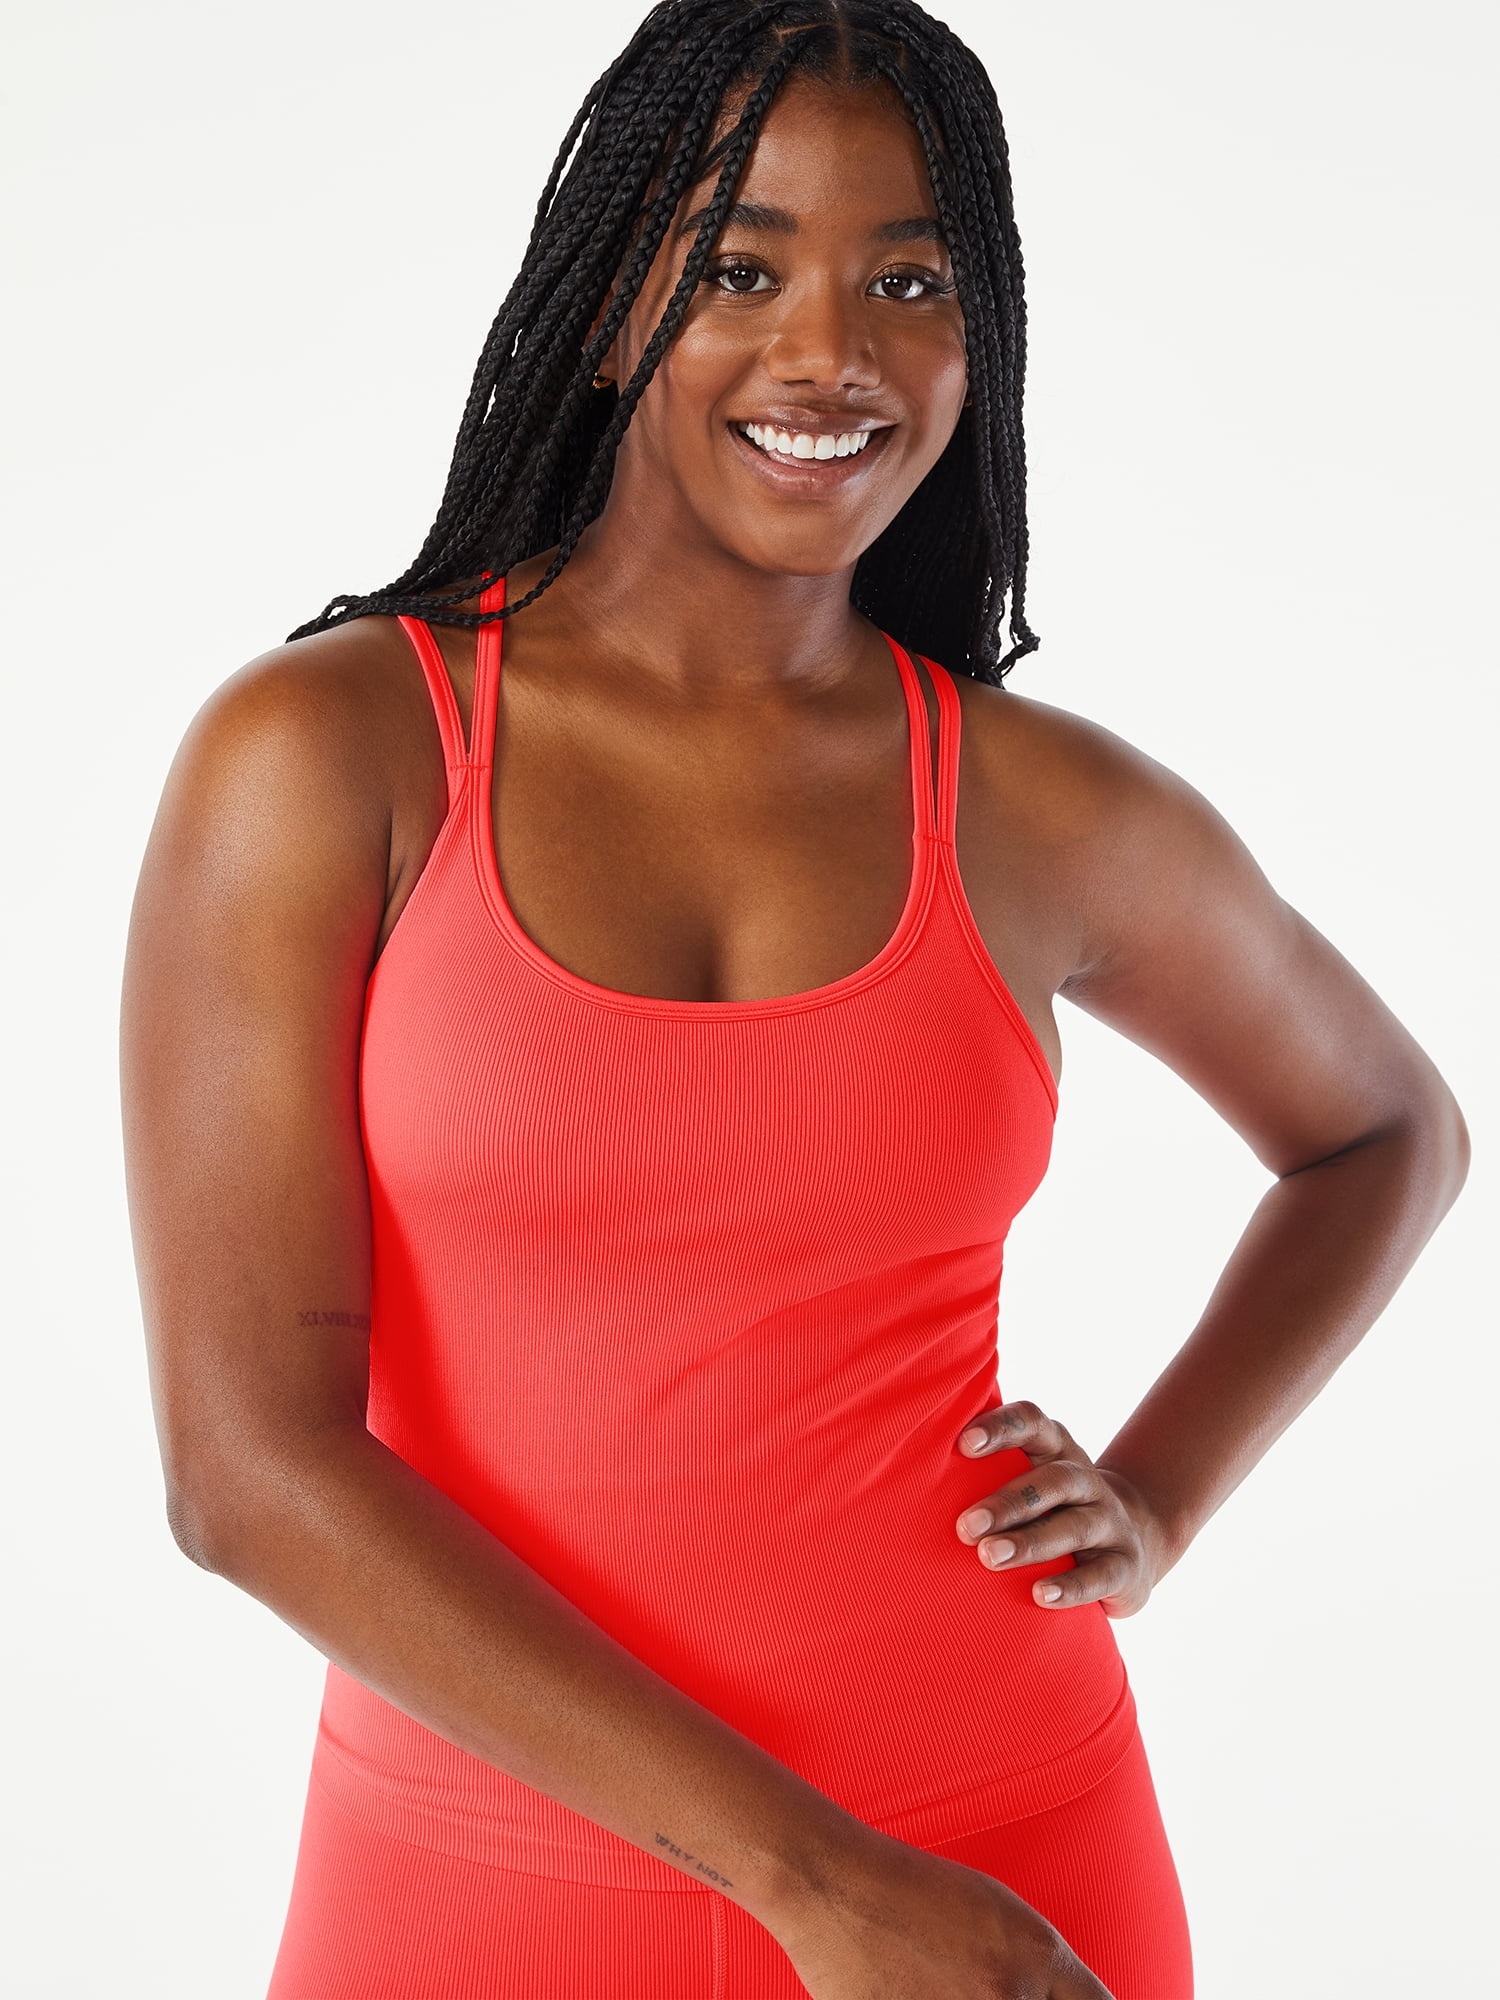 Love & Sports Women's Seamless Strappy Cami Top 